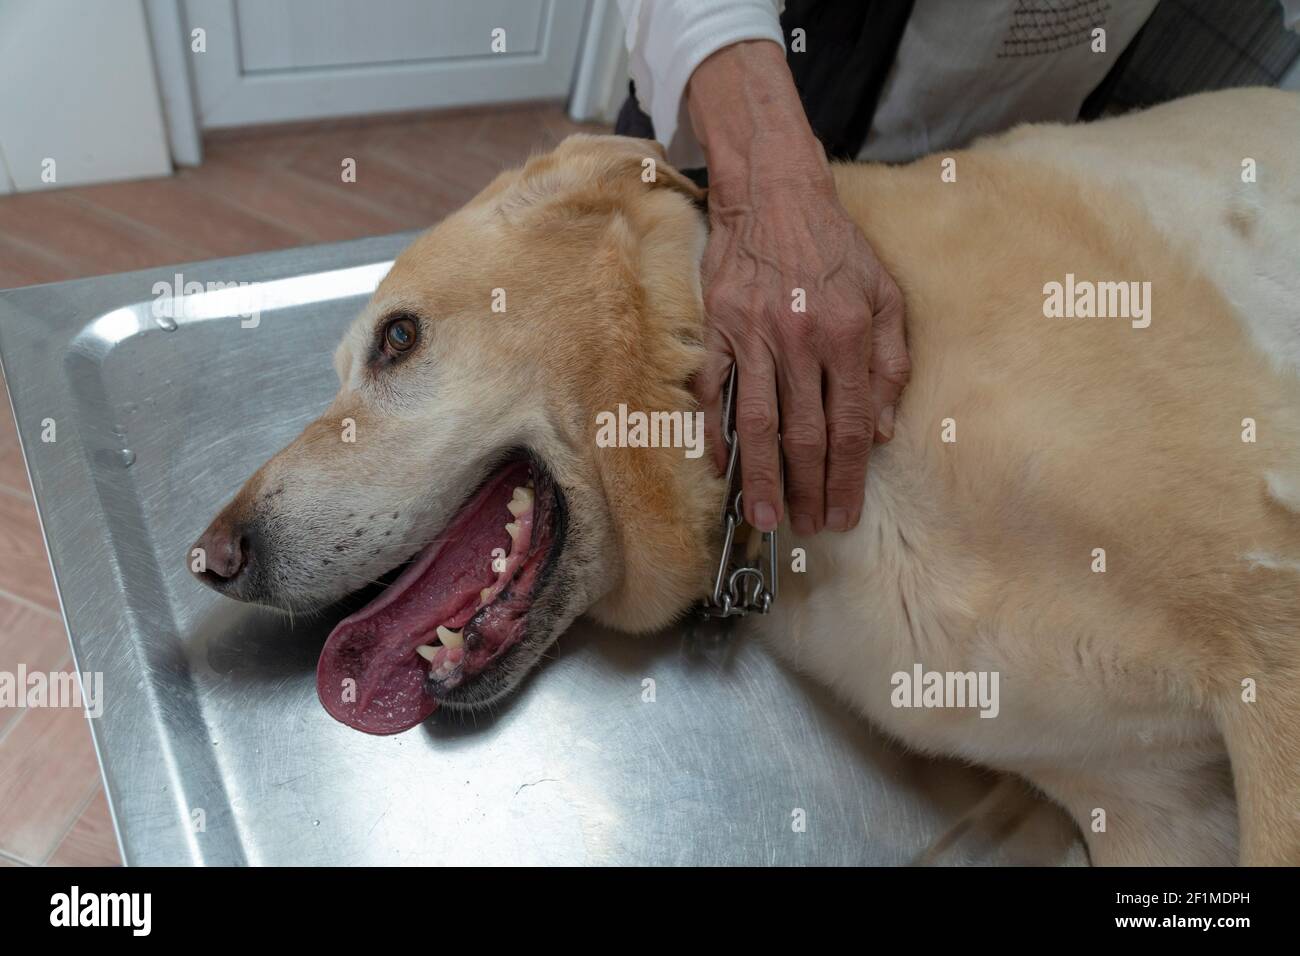 Animal spa and grooming concept: A Labrador red river is lying on a metal table and getting a hair cut. Human hands are holding his paws. Stock Photo